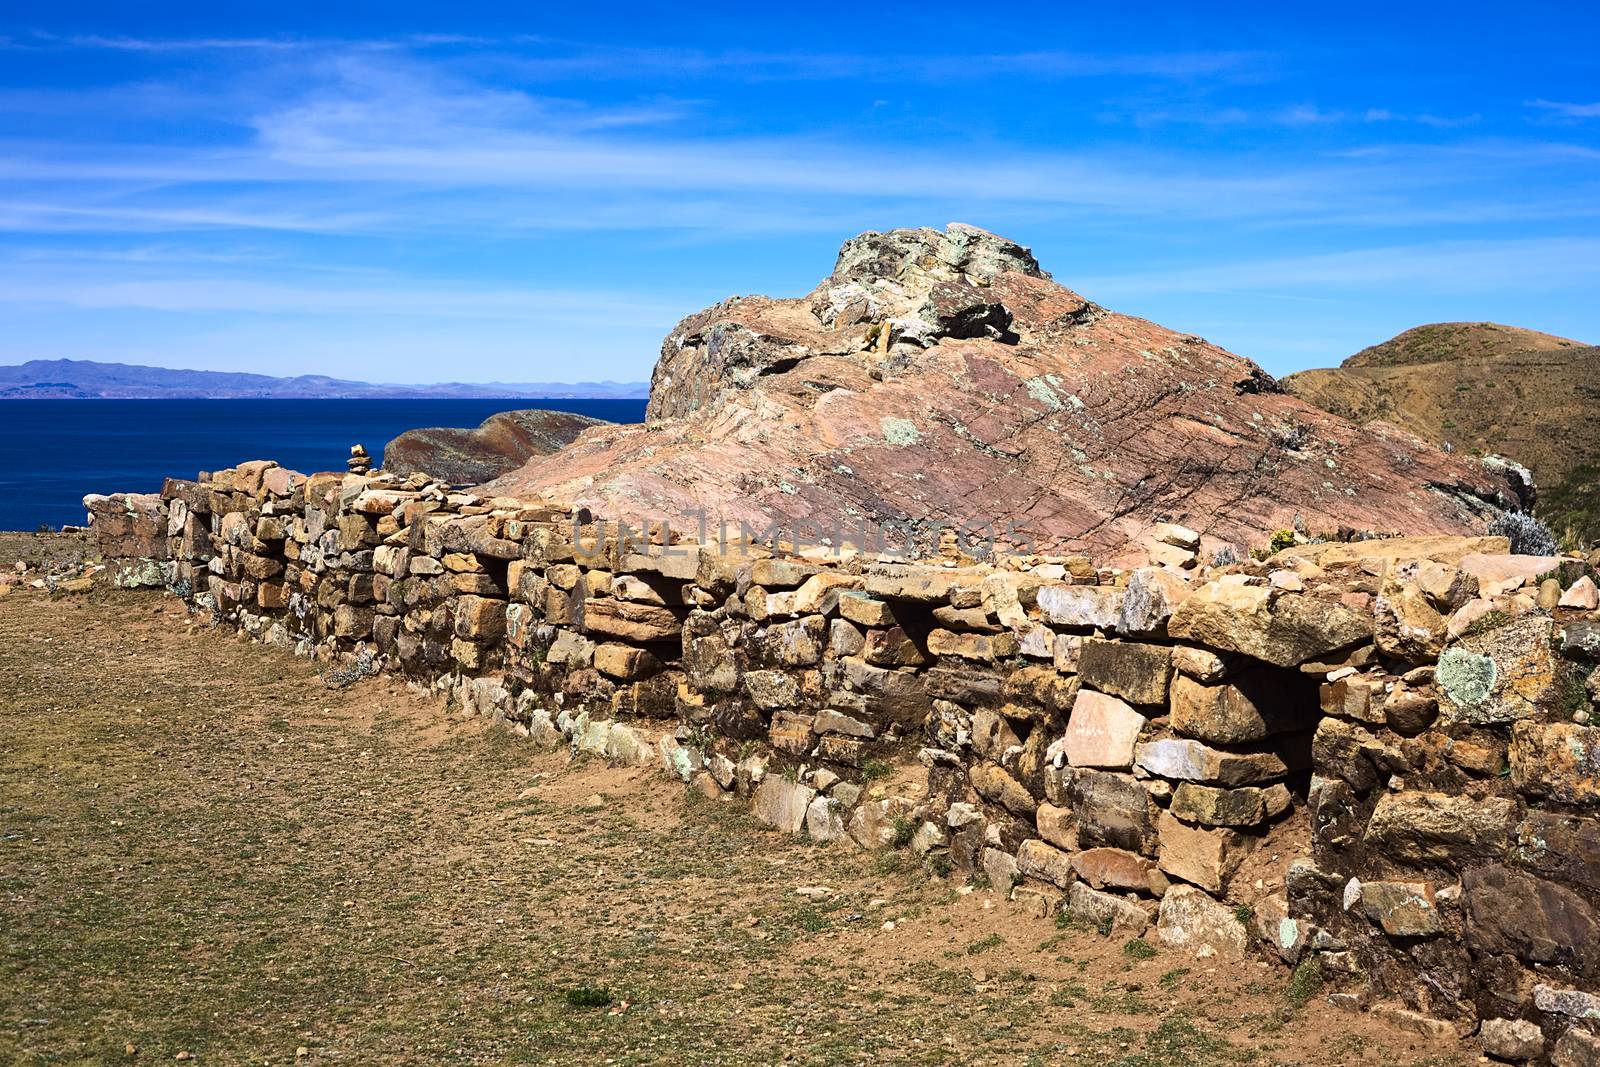 Low stone wall with many openings beside the Rock of the Puma, the sacred rock formation of the Tiwanaku and Inca cultures on the Isla del Sol (Island of the Sun) in Lake Titicaca, which is a popular travel destination in Bolivia